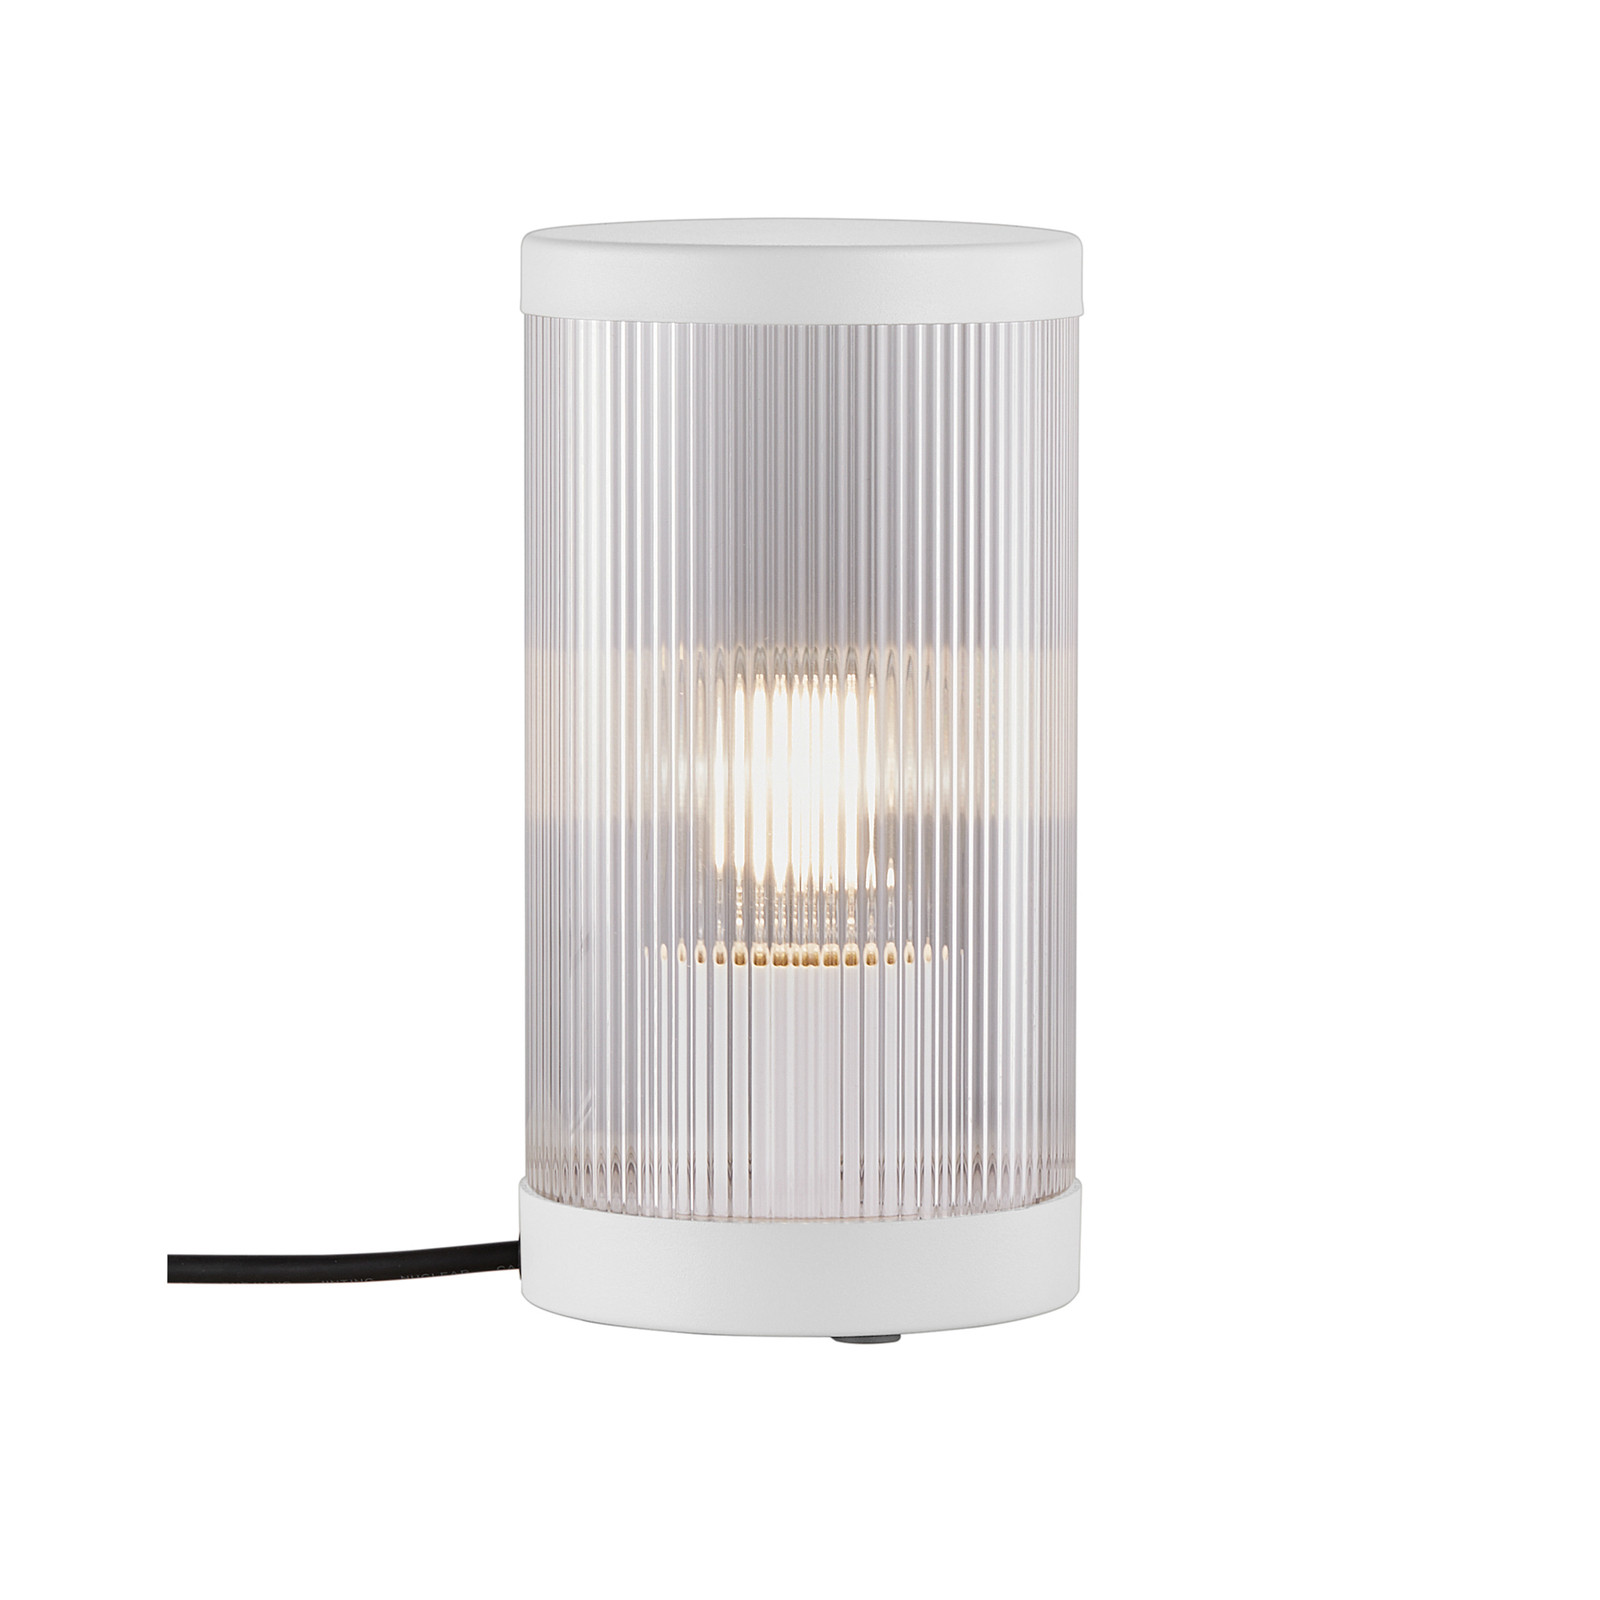 Coupar table lamp for outdoor use, white